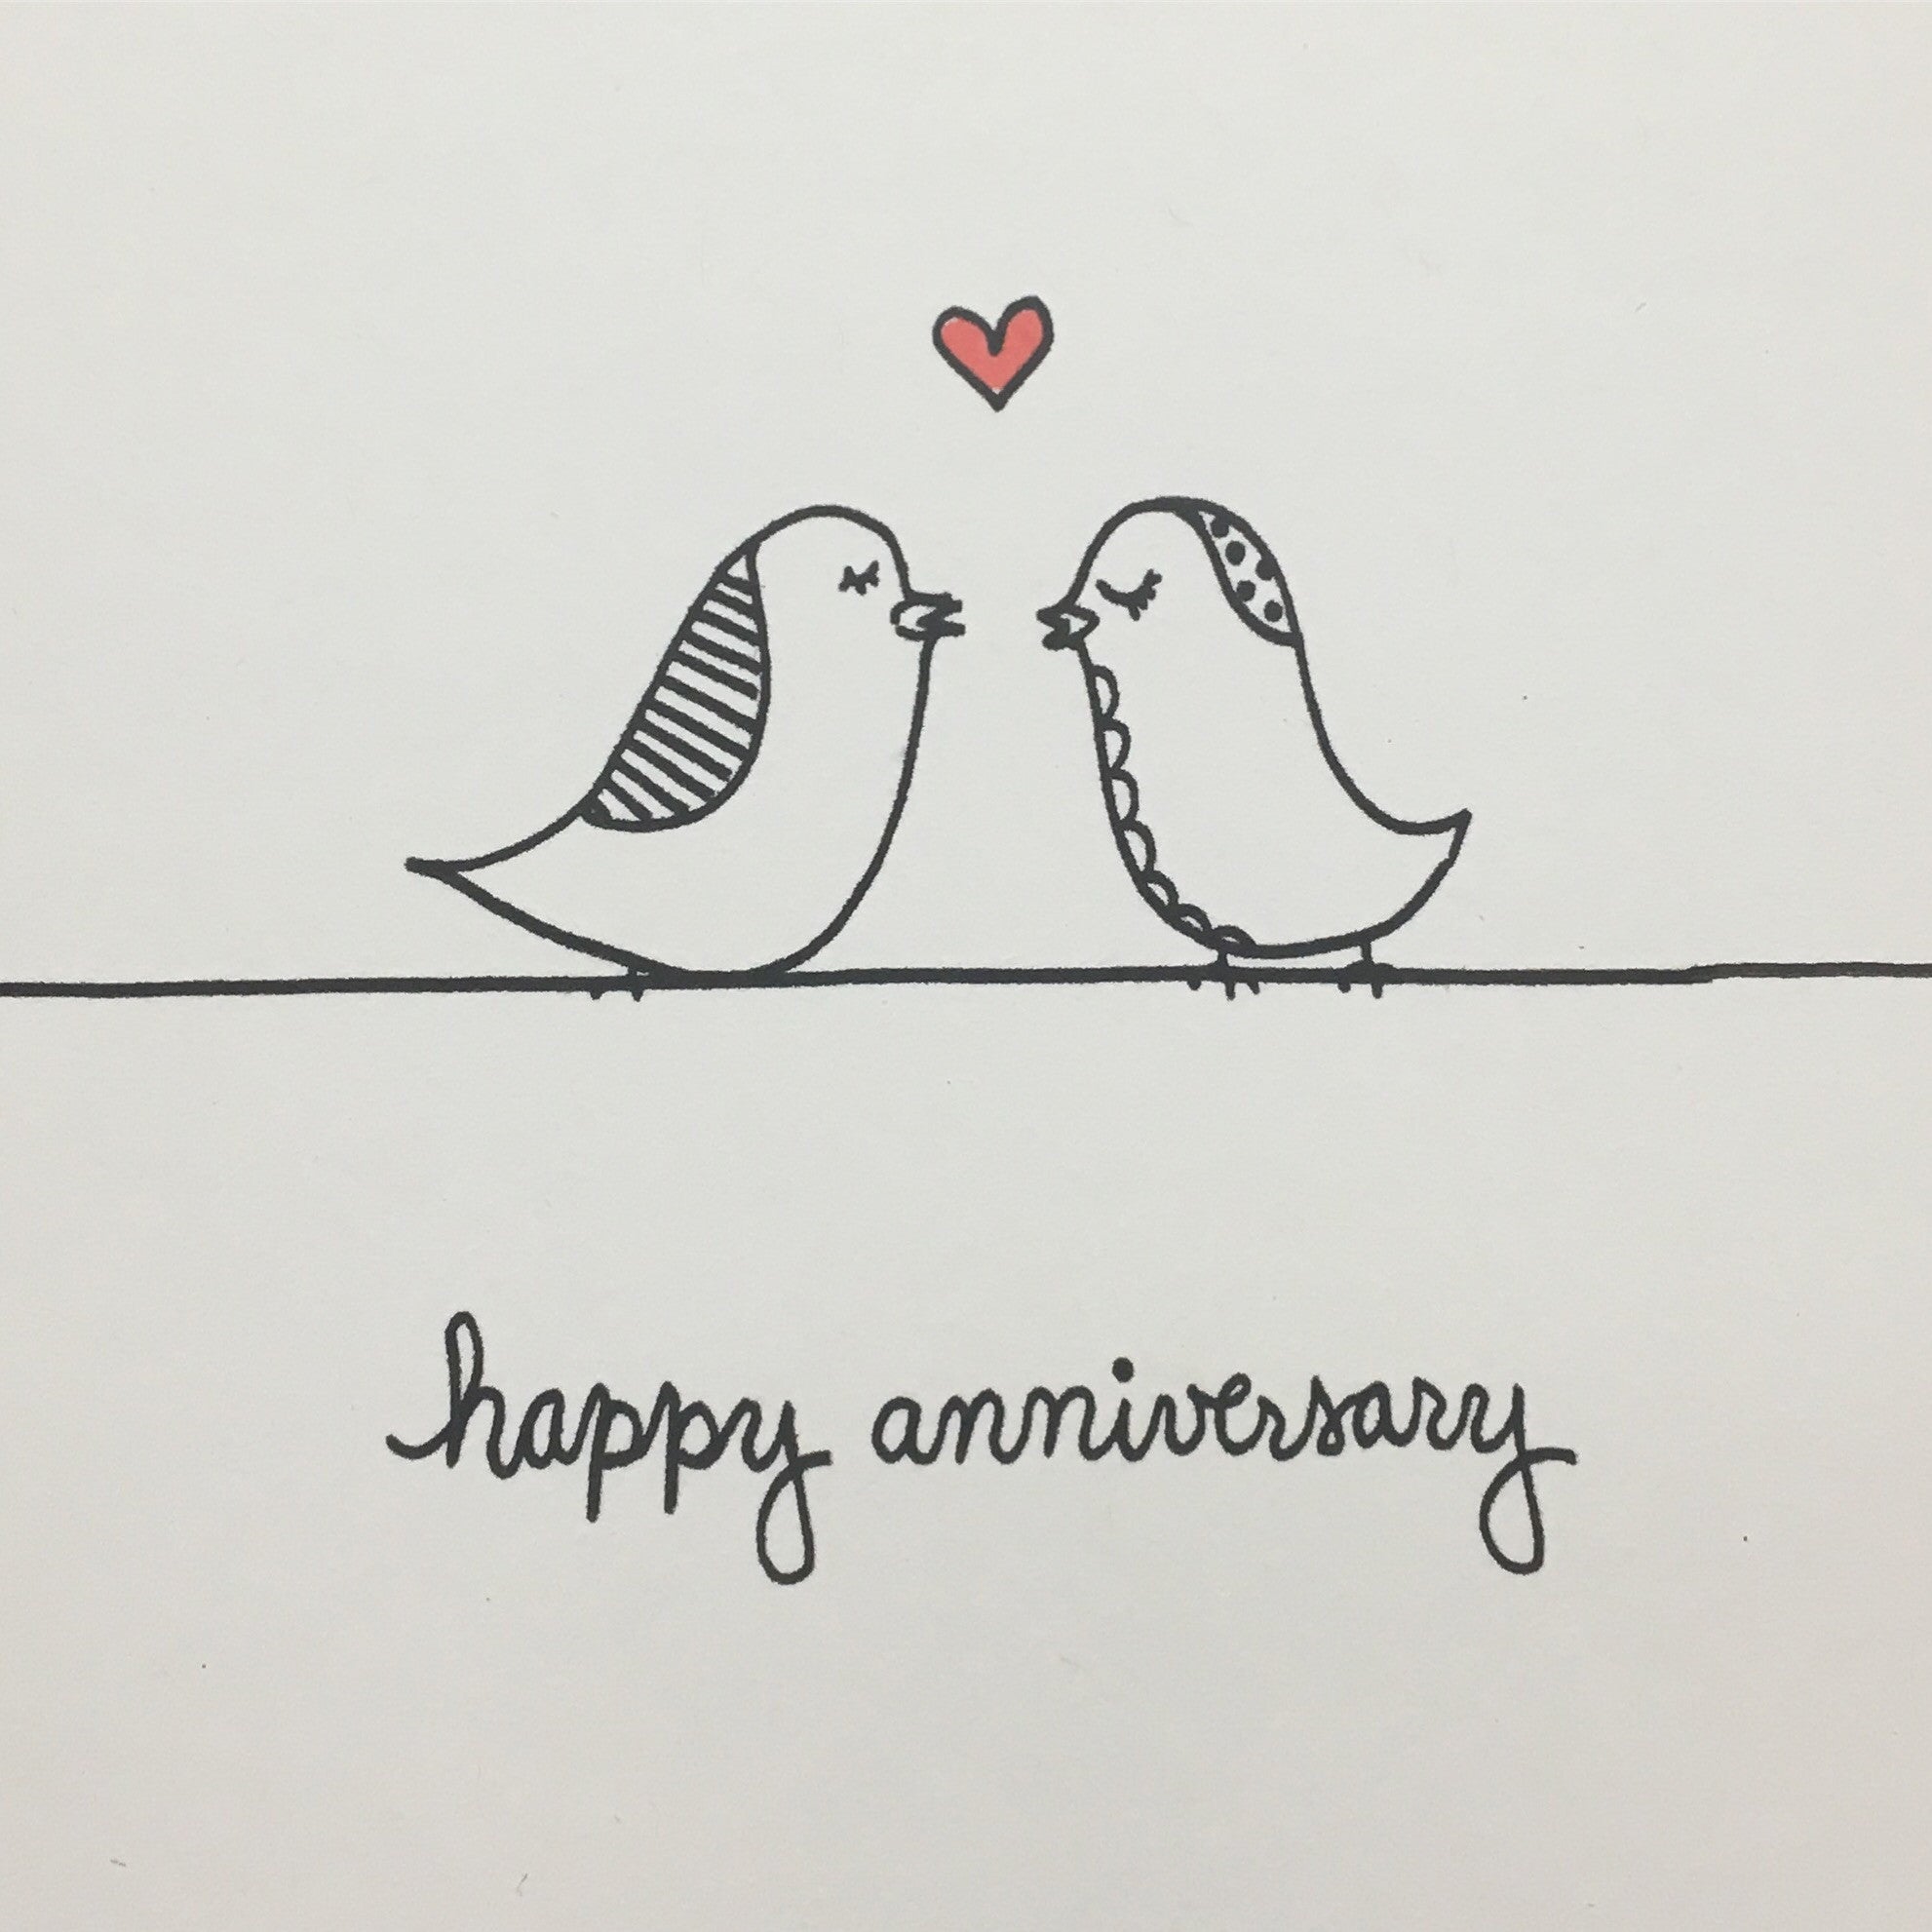 Art I did for a couple anniversary : r/IDAP